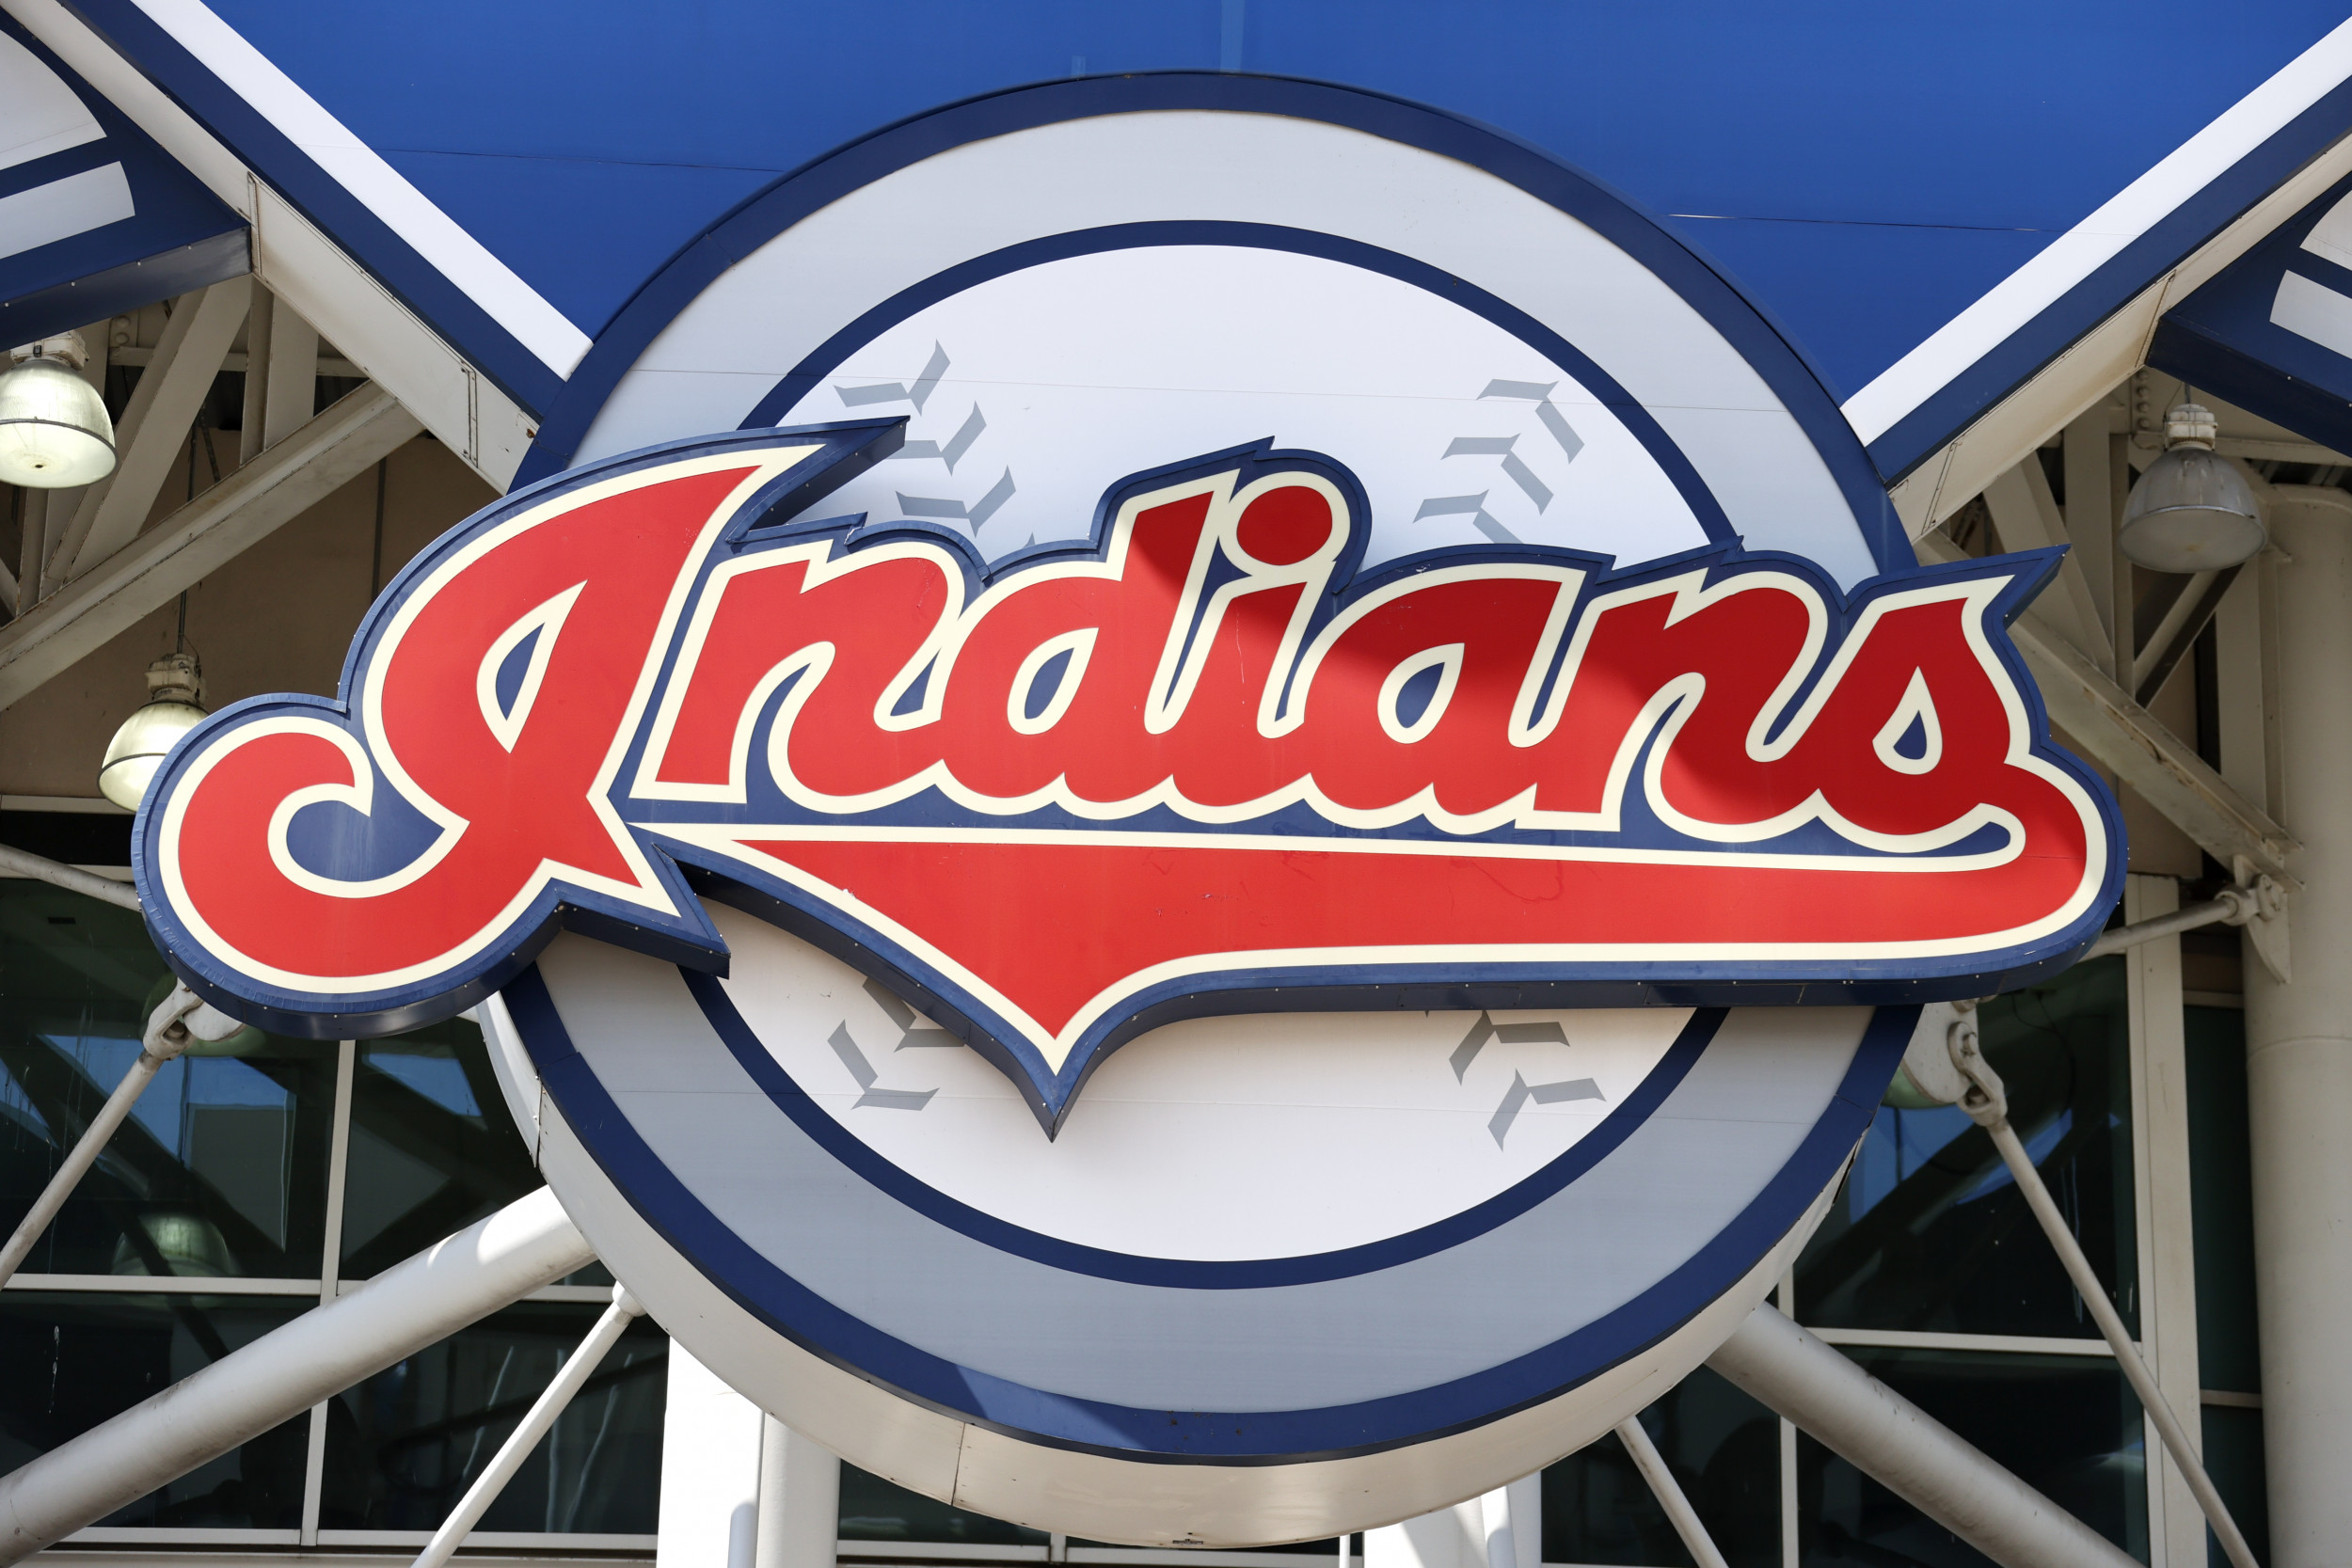 Guardians will be Cleveland's new baseball team name